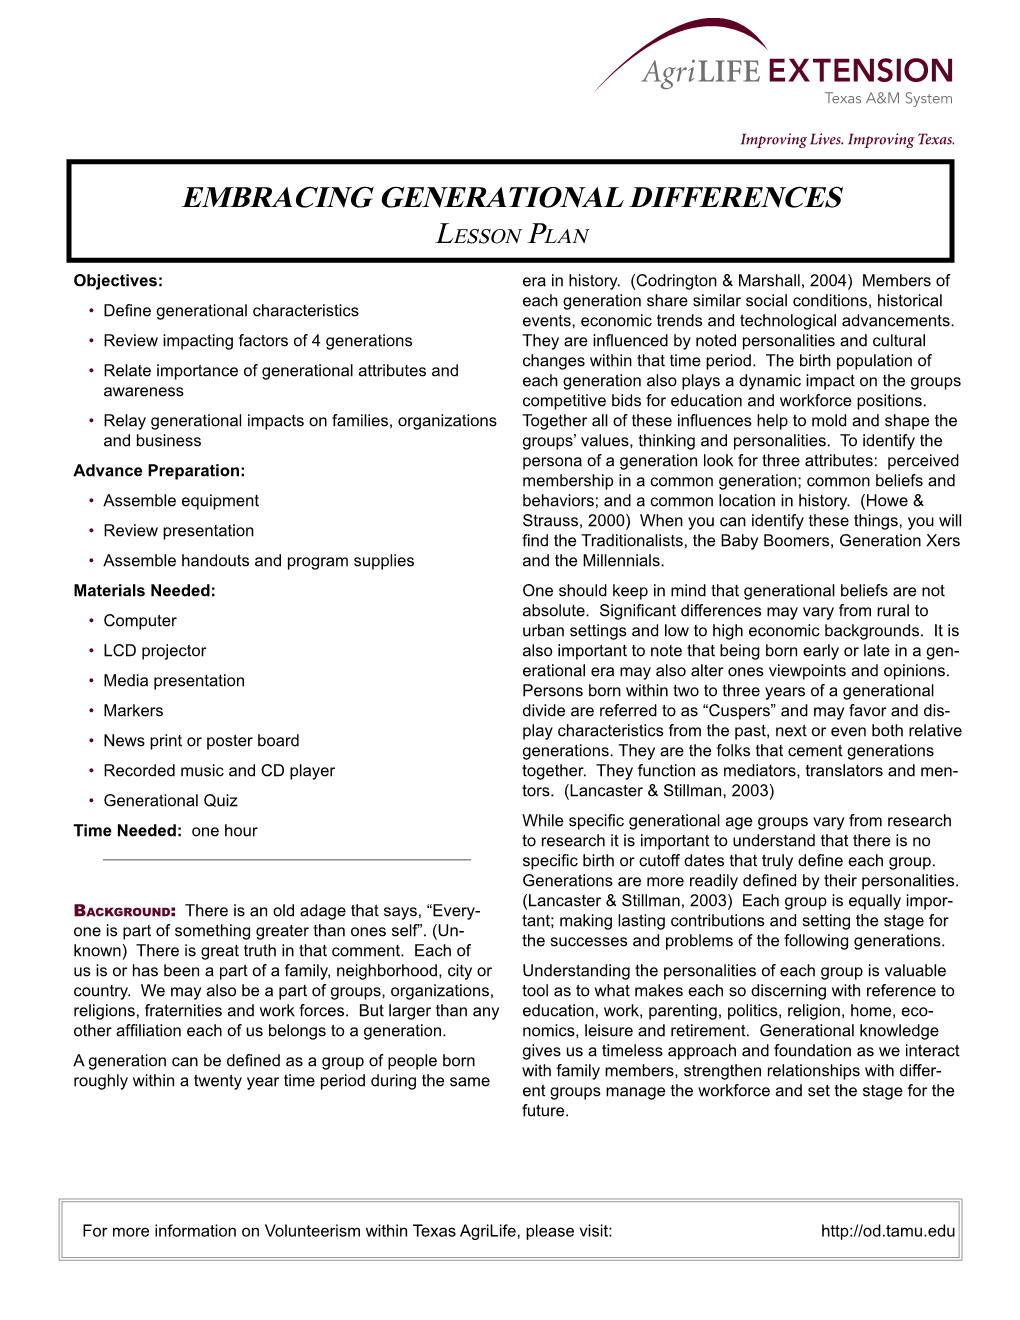 Embracing Generational Differences Lesson Plan